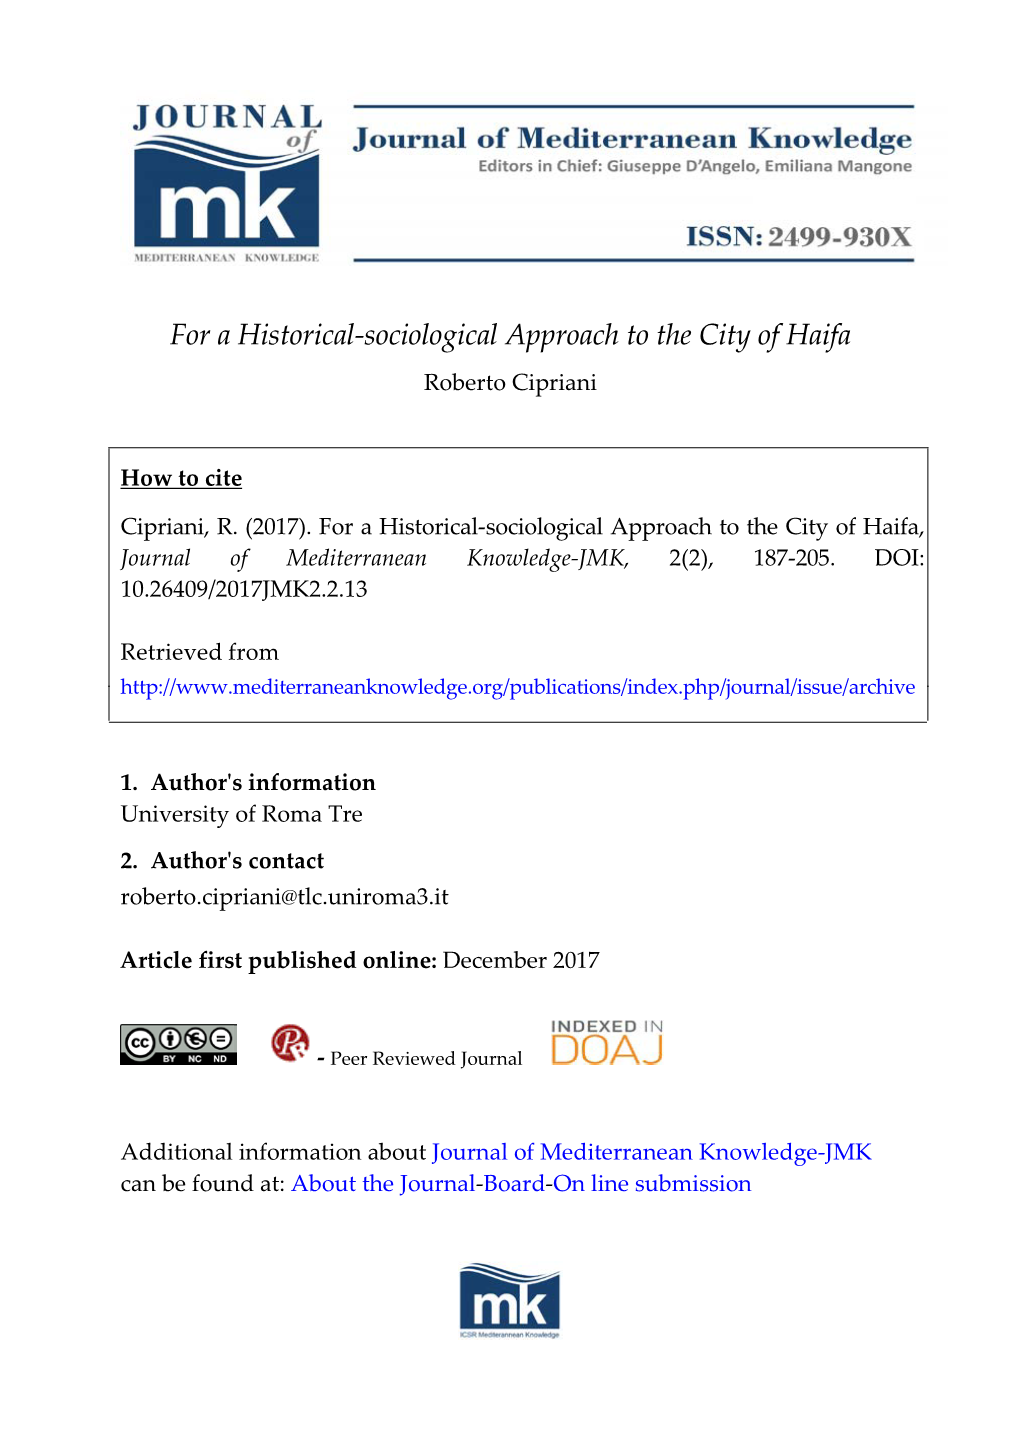 For a Historical-Sociological Approach to the City of Haifa Roberto Cipriani